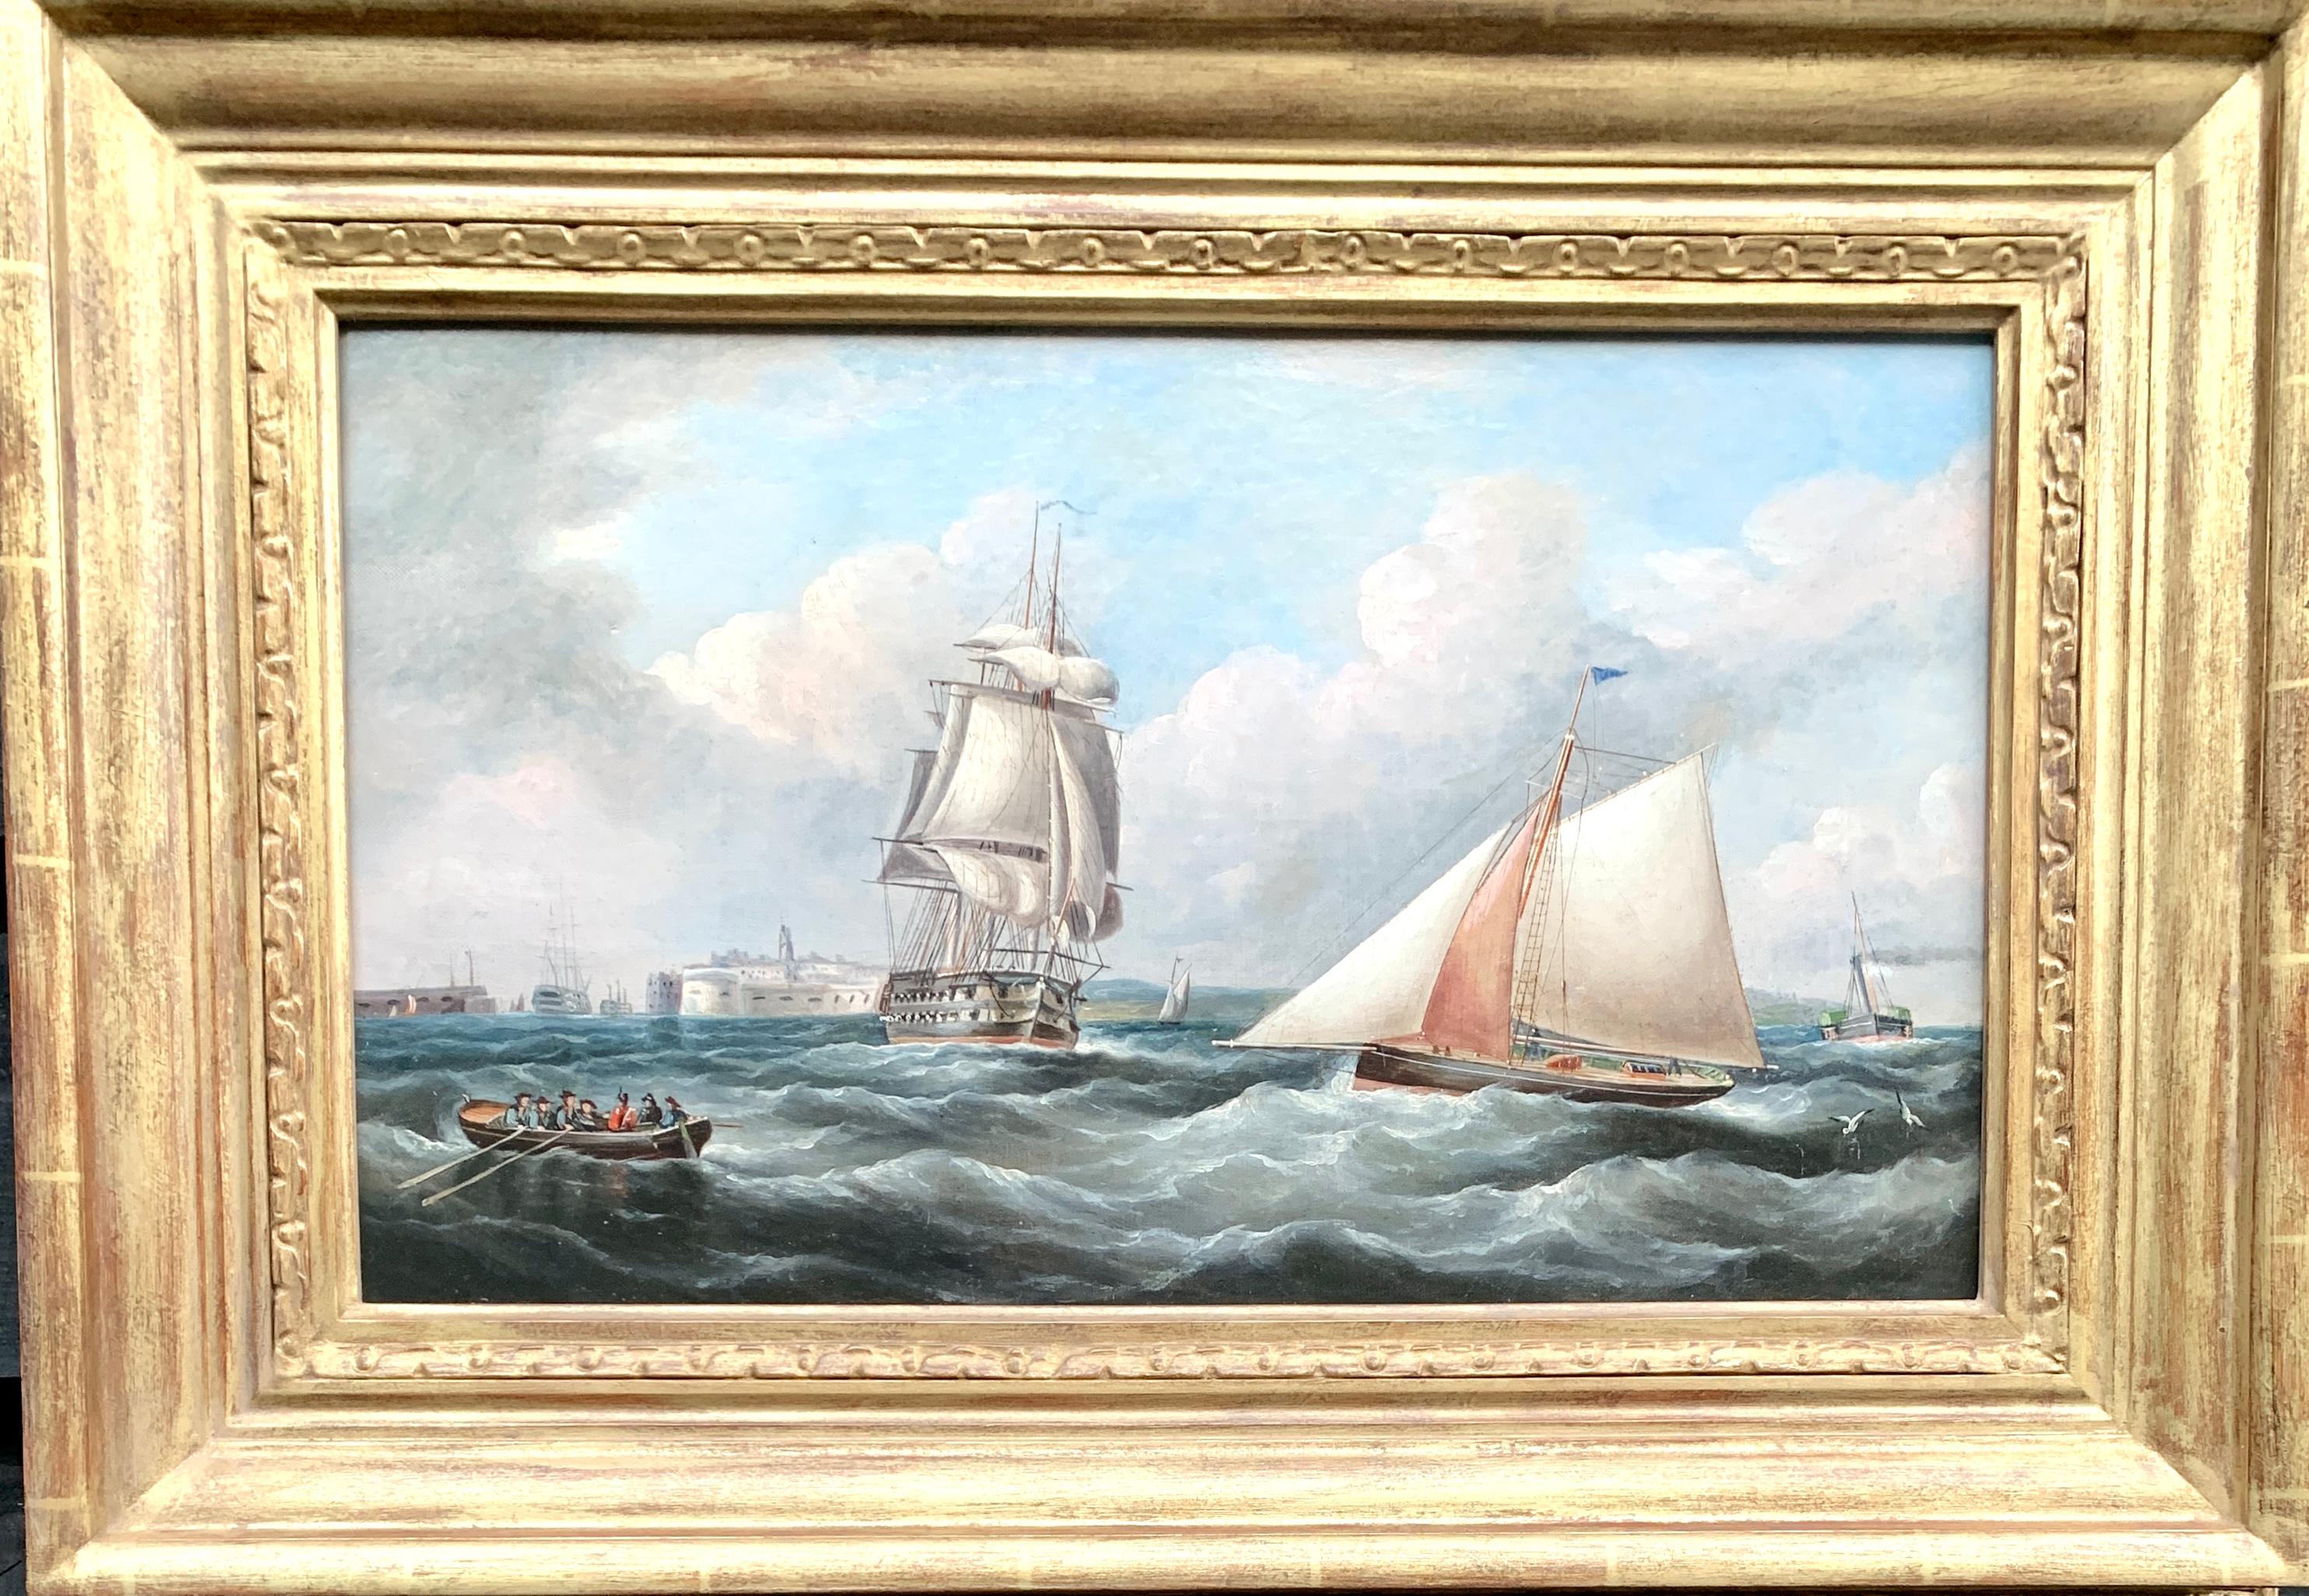 R.B.Spencer Landscape Painting - Antique 19th century English Yacht and Warship at sea off Portsmouth Harbor UK